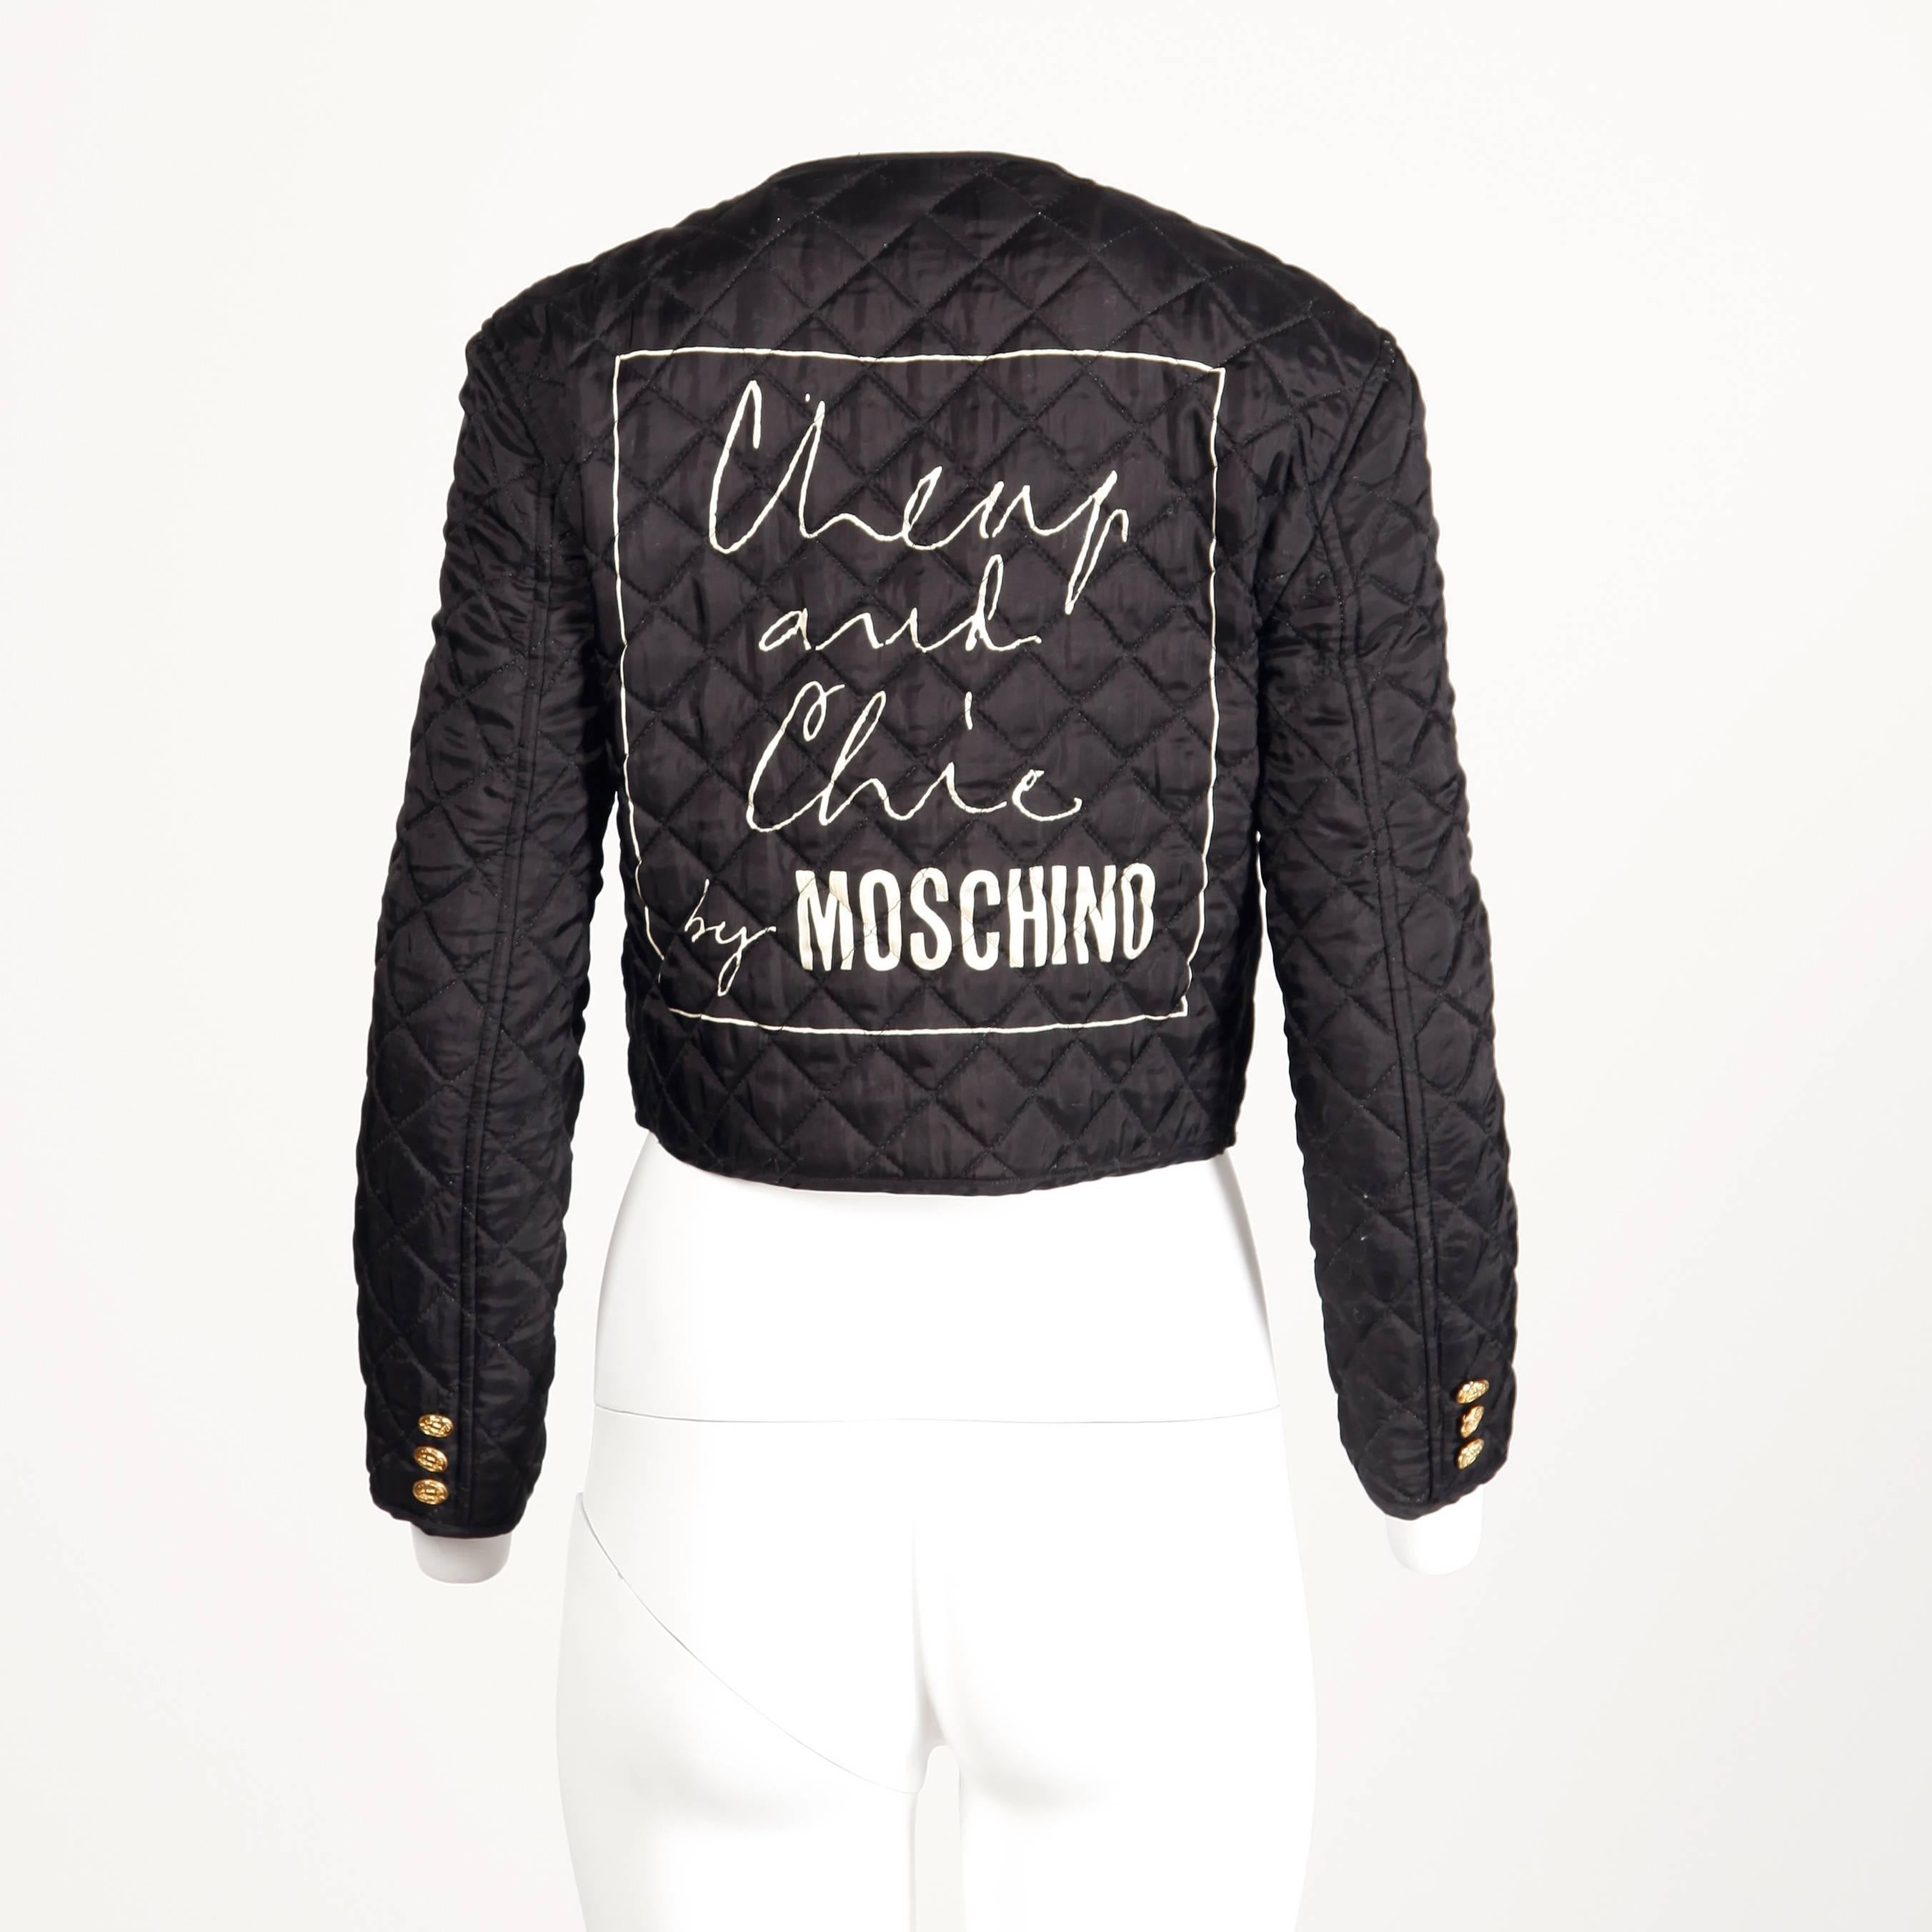 Women's Moschino Vintage 1990s 90s Black Quilted Jacket with Cheap & Chic Graphic For Sale